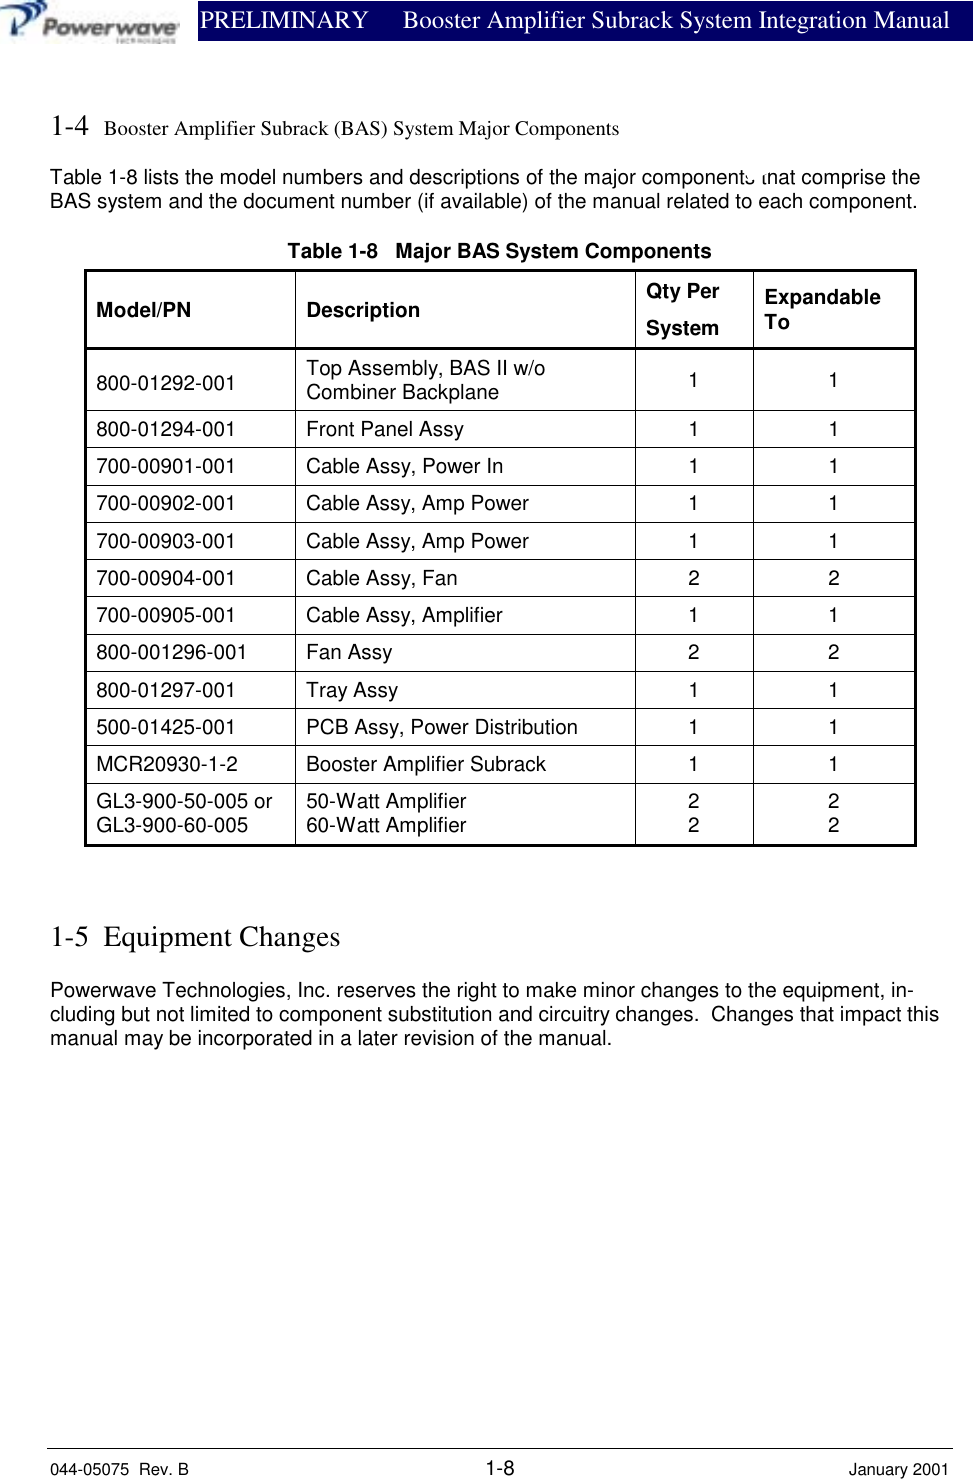                PRELIMINARY Booster Amplifier Subrack System Integration Manual044-05075  Rev. B 1-8 January 20011-4  Booster Amplifier Subrack (BAS) System Major ComponentsTable 1-8 lists the model numbers and descriptions of the major components that comprise theBAS system and the document number (if available) of the manual related to each component.Table 1-8   Major BAS System ComponentsModel/PN Description Qty PerSystemExpandableTo800-01292-001 Top Assembly, BAS II w/oCombiner Backplane 11800-01294-001 Front Panel Assy 1 1700-00901-001 Cable Assy, Power In 1 1700-00902-001 Cable Assy, Amp Power 1 1700-00903-001 Cable Assy, Amp Power 1 1700-00904-001 Cable Assy, Fan 2 2700-00905-001 Cable Assy, Amplifier 1 1800-001296-001 Fan Assy 2 2800-01297-001 Tray Assy 1 1500-01425-001 PCB Assy, Power Distribution 1 1MCR20930-1-2 Booster Amplifier Subrack 1 1GL3-900-50-005 orGL3-900-60-005 50-Watt Amplifier60-Watt Amplifier 22221-5  Equipment ChangesPowerwave Technologies, Inc. reserves the right to make minor changes to the equipment, in-cluding but not limited to component substitution and circuitry changes.  Changes that impact thismanual may be incorporated in a later revision of the manual.